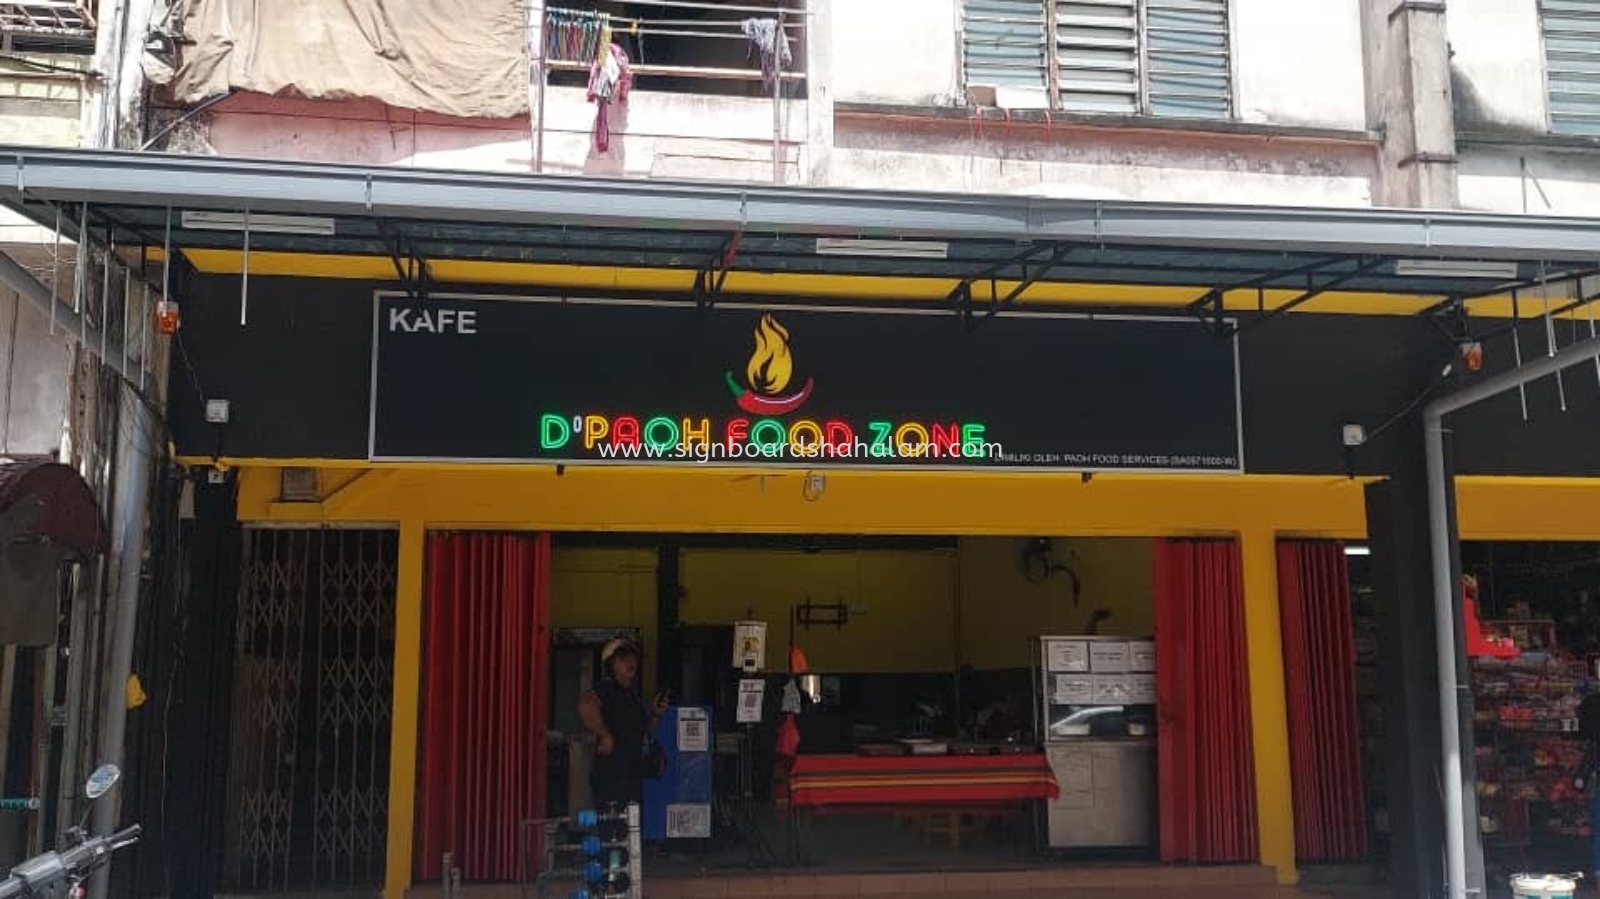 Paoh Food KL - 3D Led Signboard With Led Neon light